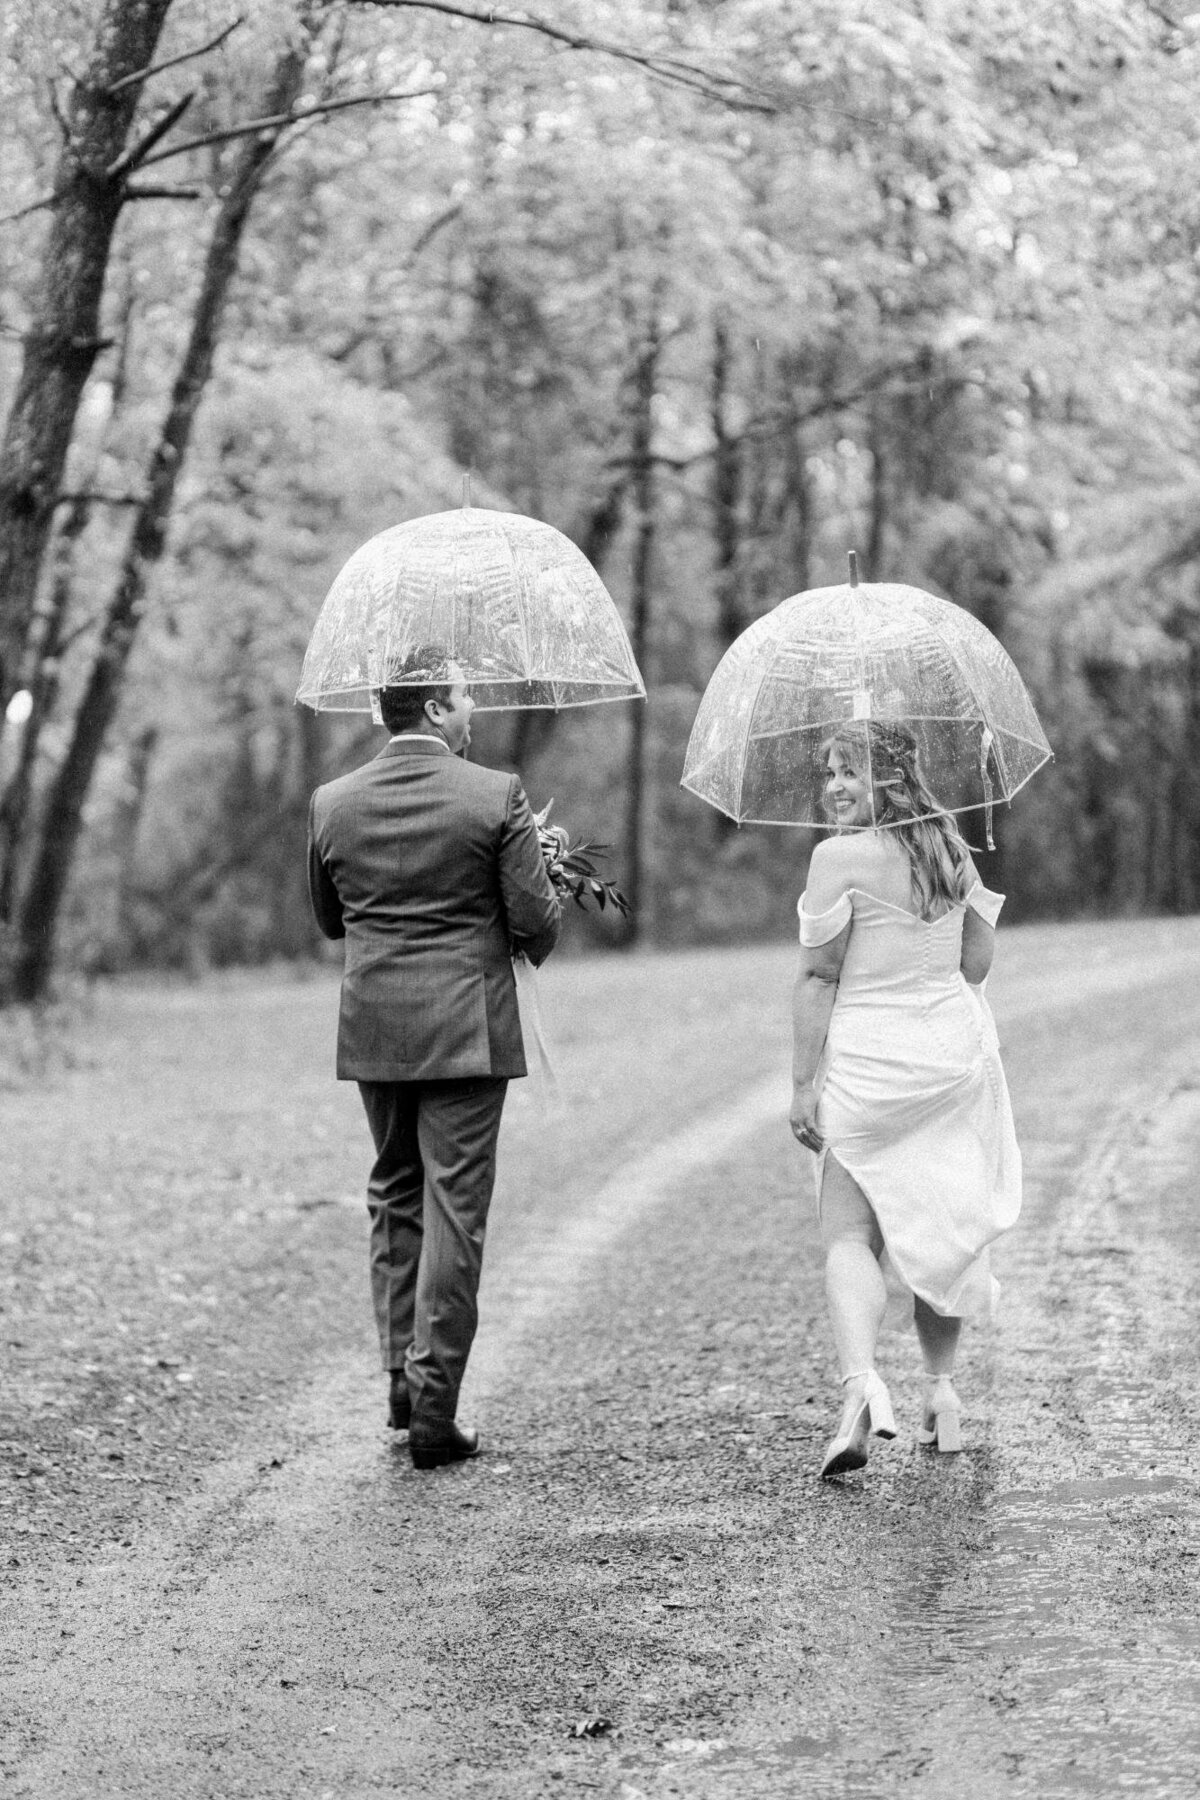 A couple walking under transparent umbrellas on a wet path with trees around, captured in black and white.